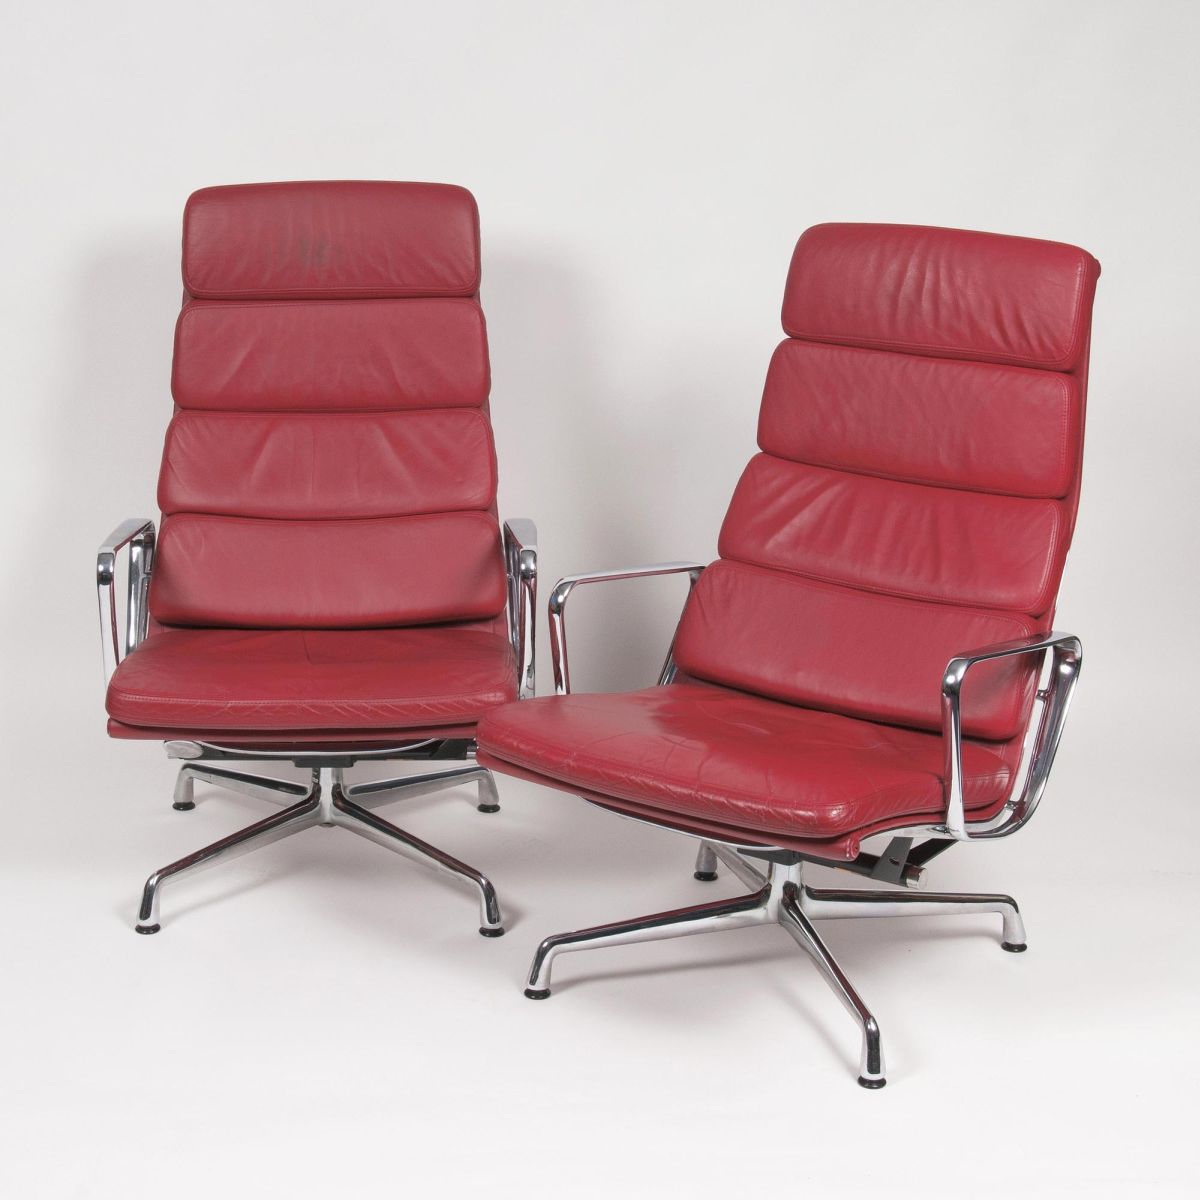 A Pair of Soft Pad Chairs EA 222